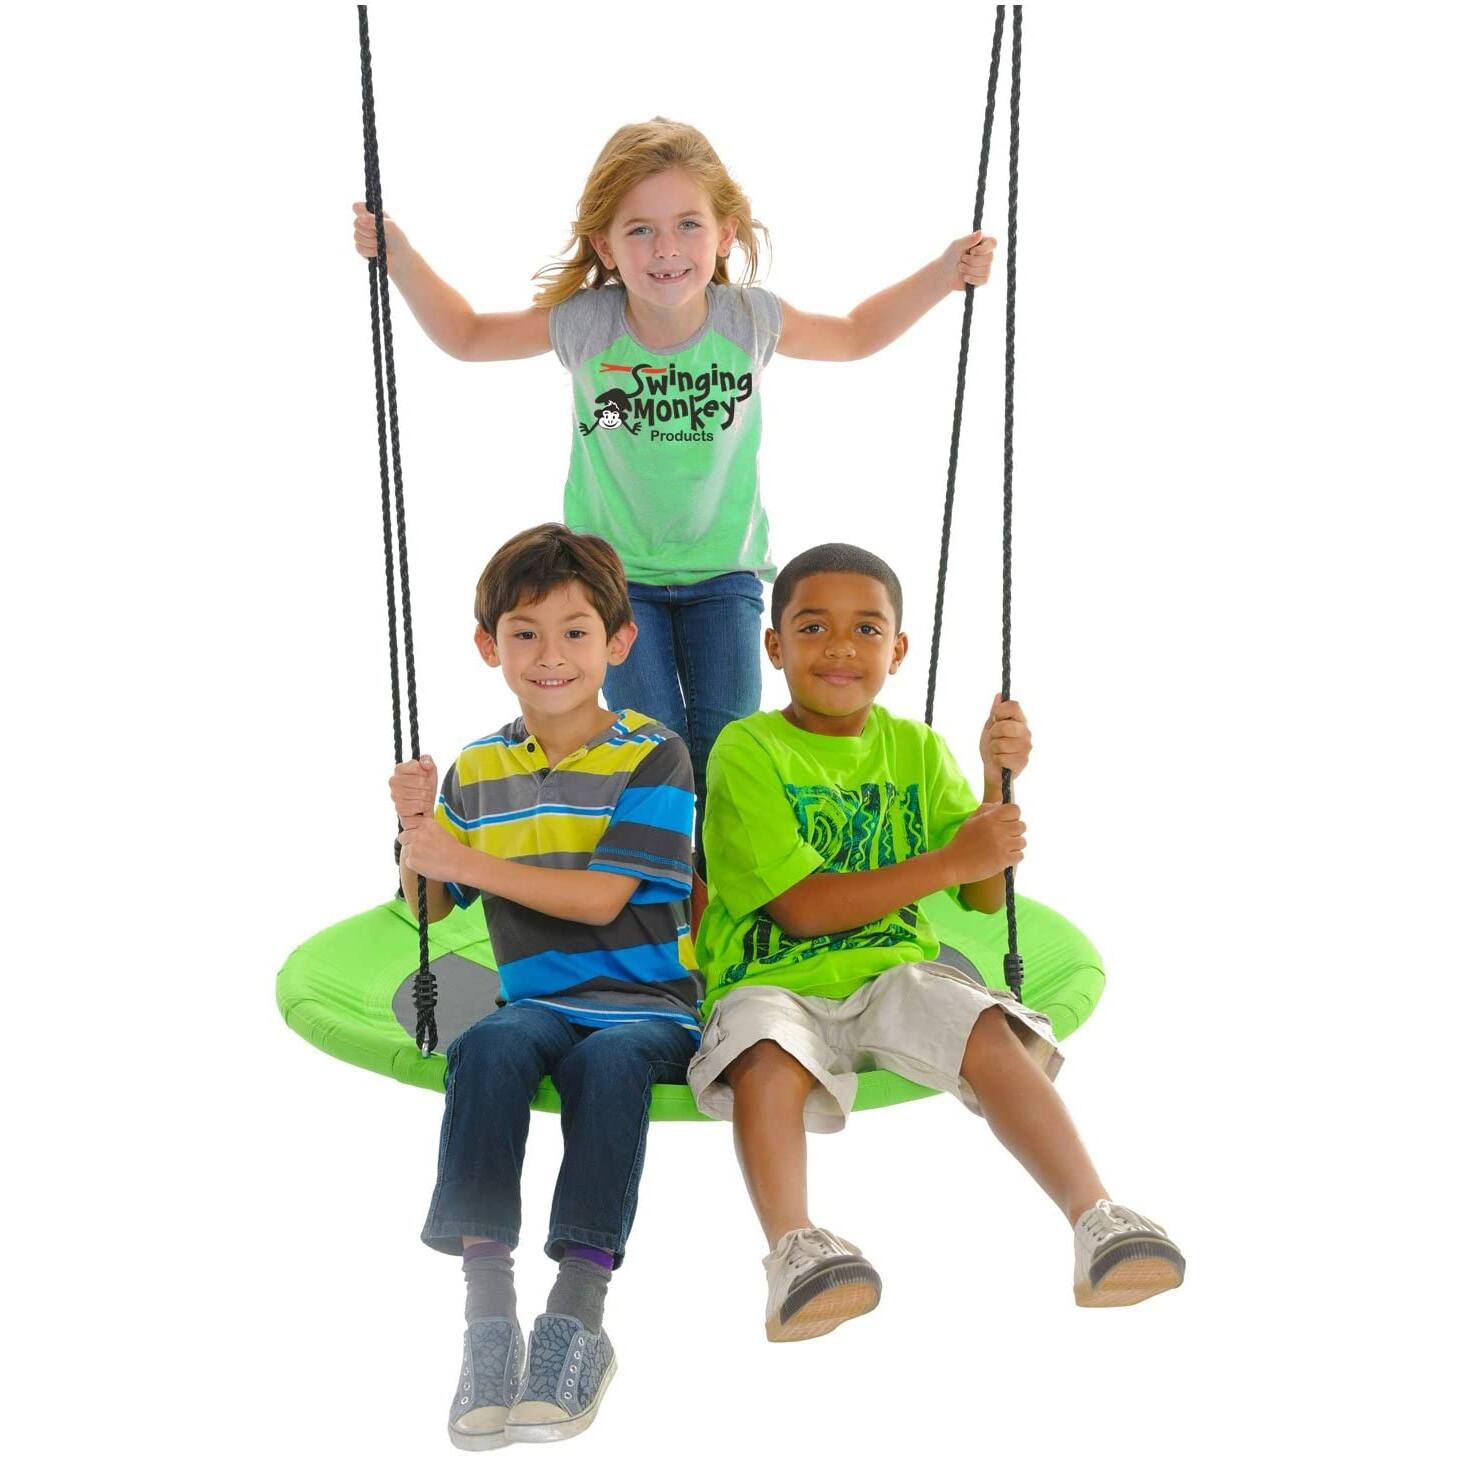 Swinging Monkey Giant 40" Web Outdoor Family Play Saucer Swing, Green (2 Pack)